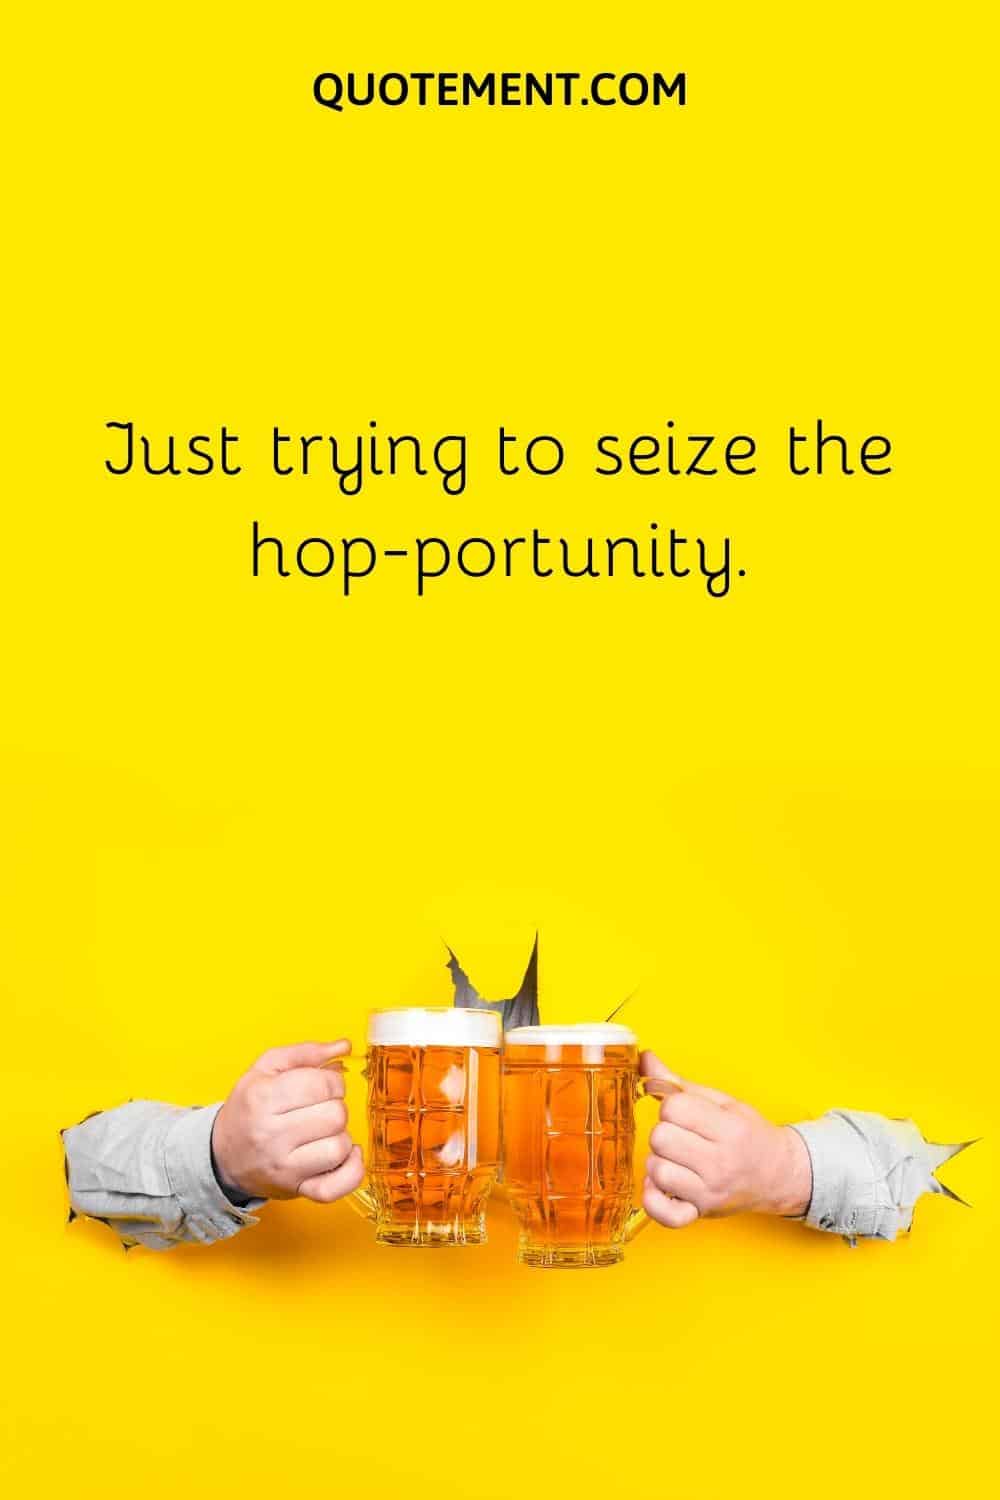 Just trying to seize the hop-portunity.